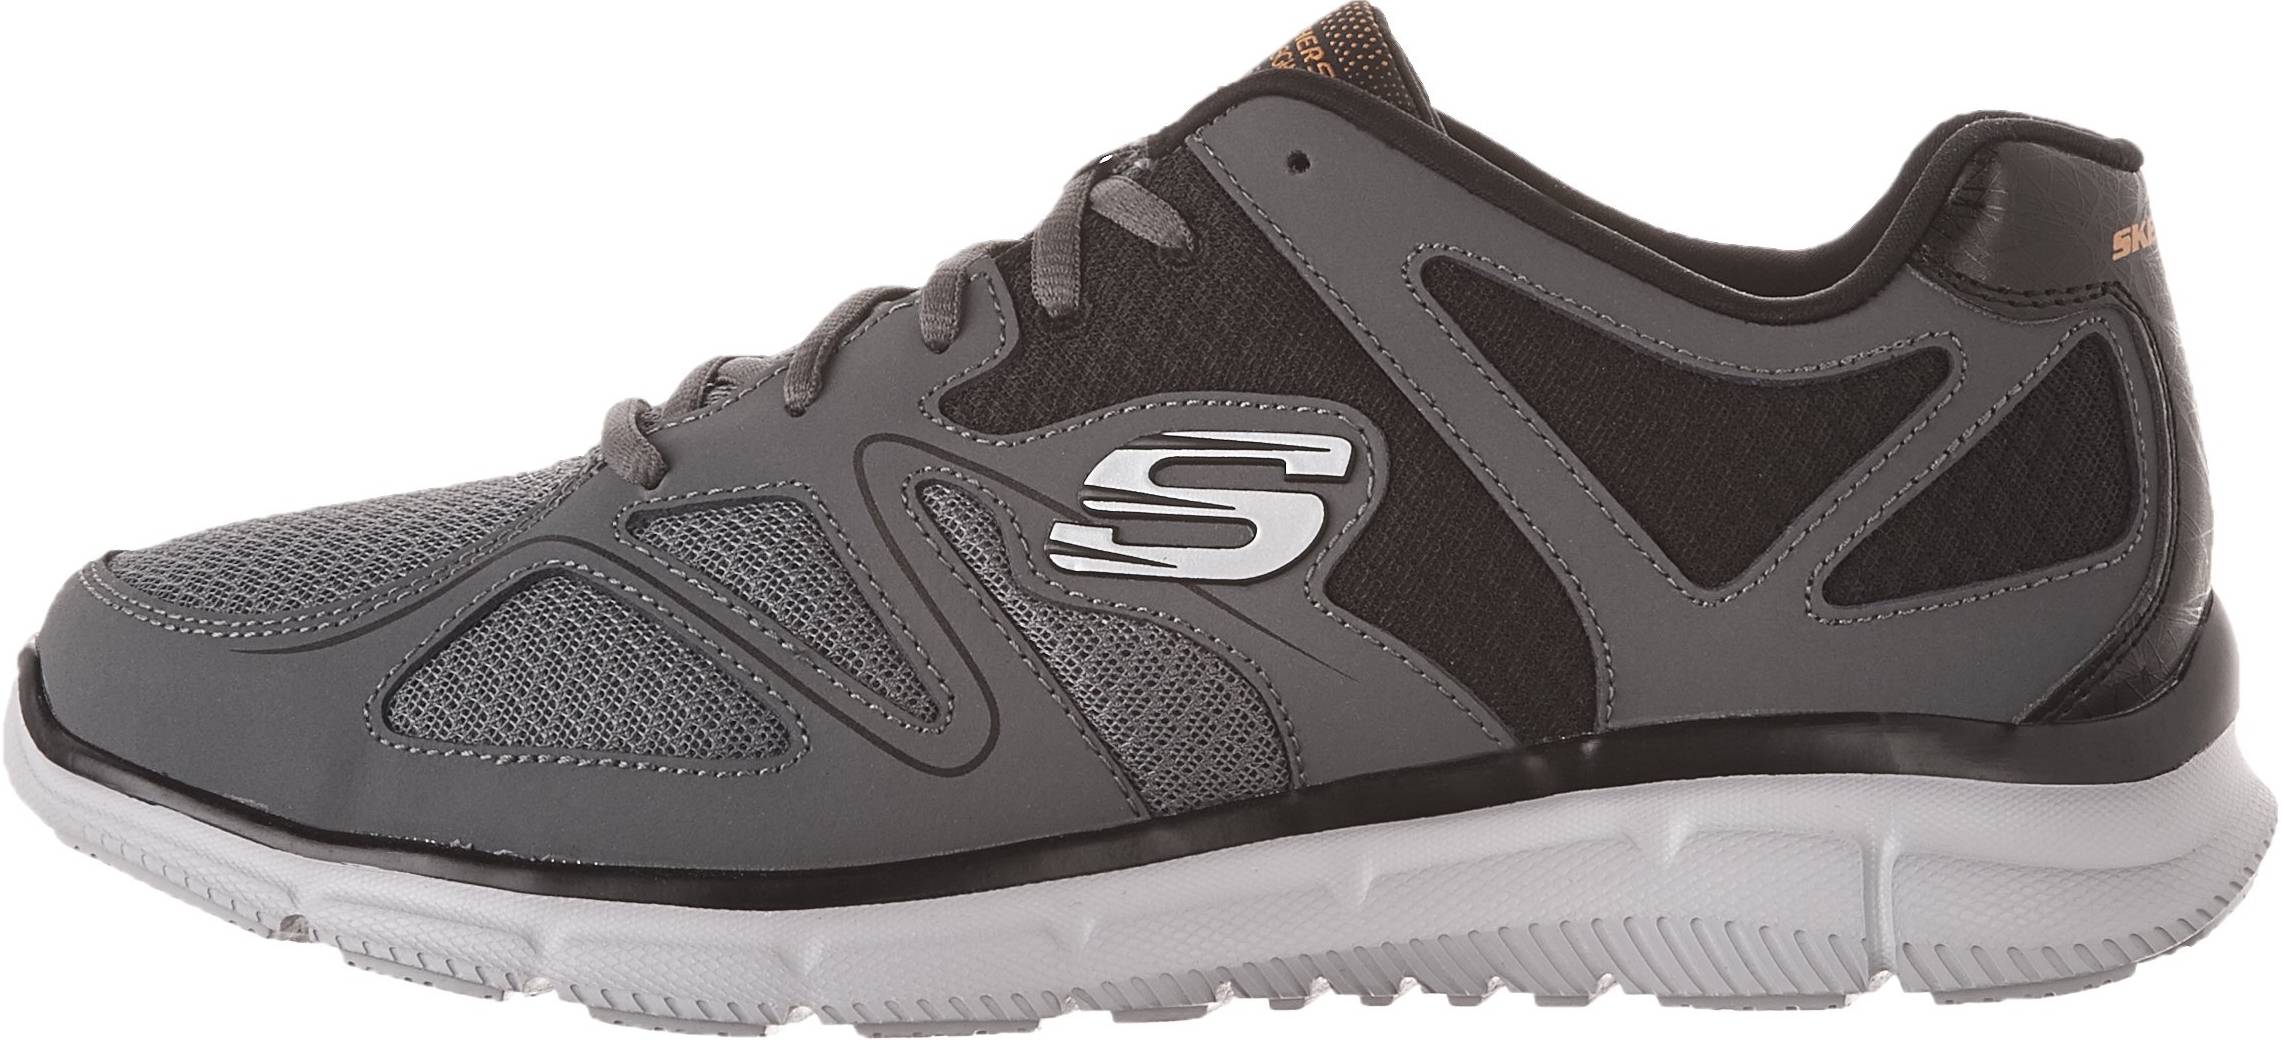 Save 39% on Skechers Workout Shoes (30 